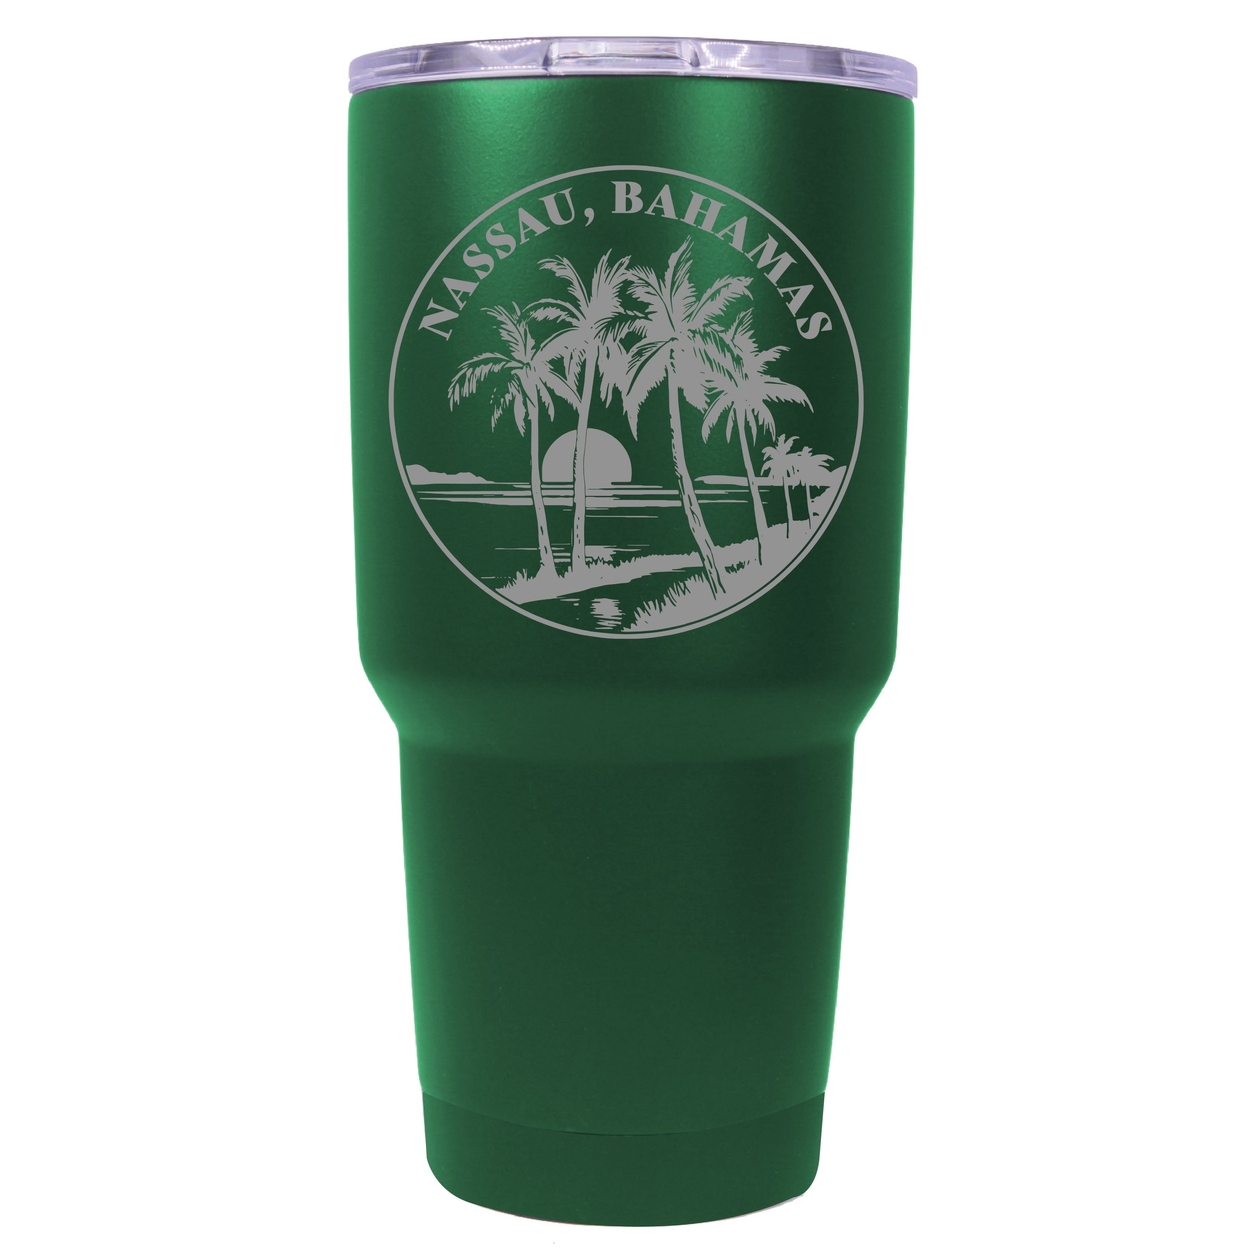 Nassau The Bahamas Souvenir 24 Oz Engraved Insulated Stainless Steel Tumbler - Green,,4-Pack